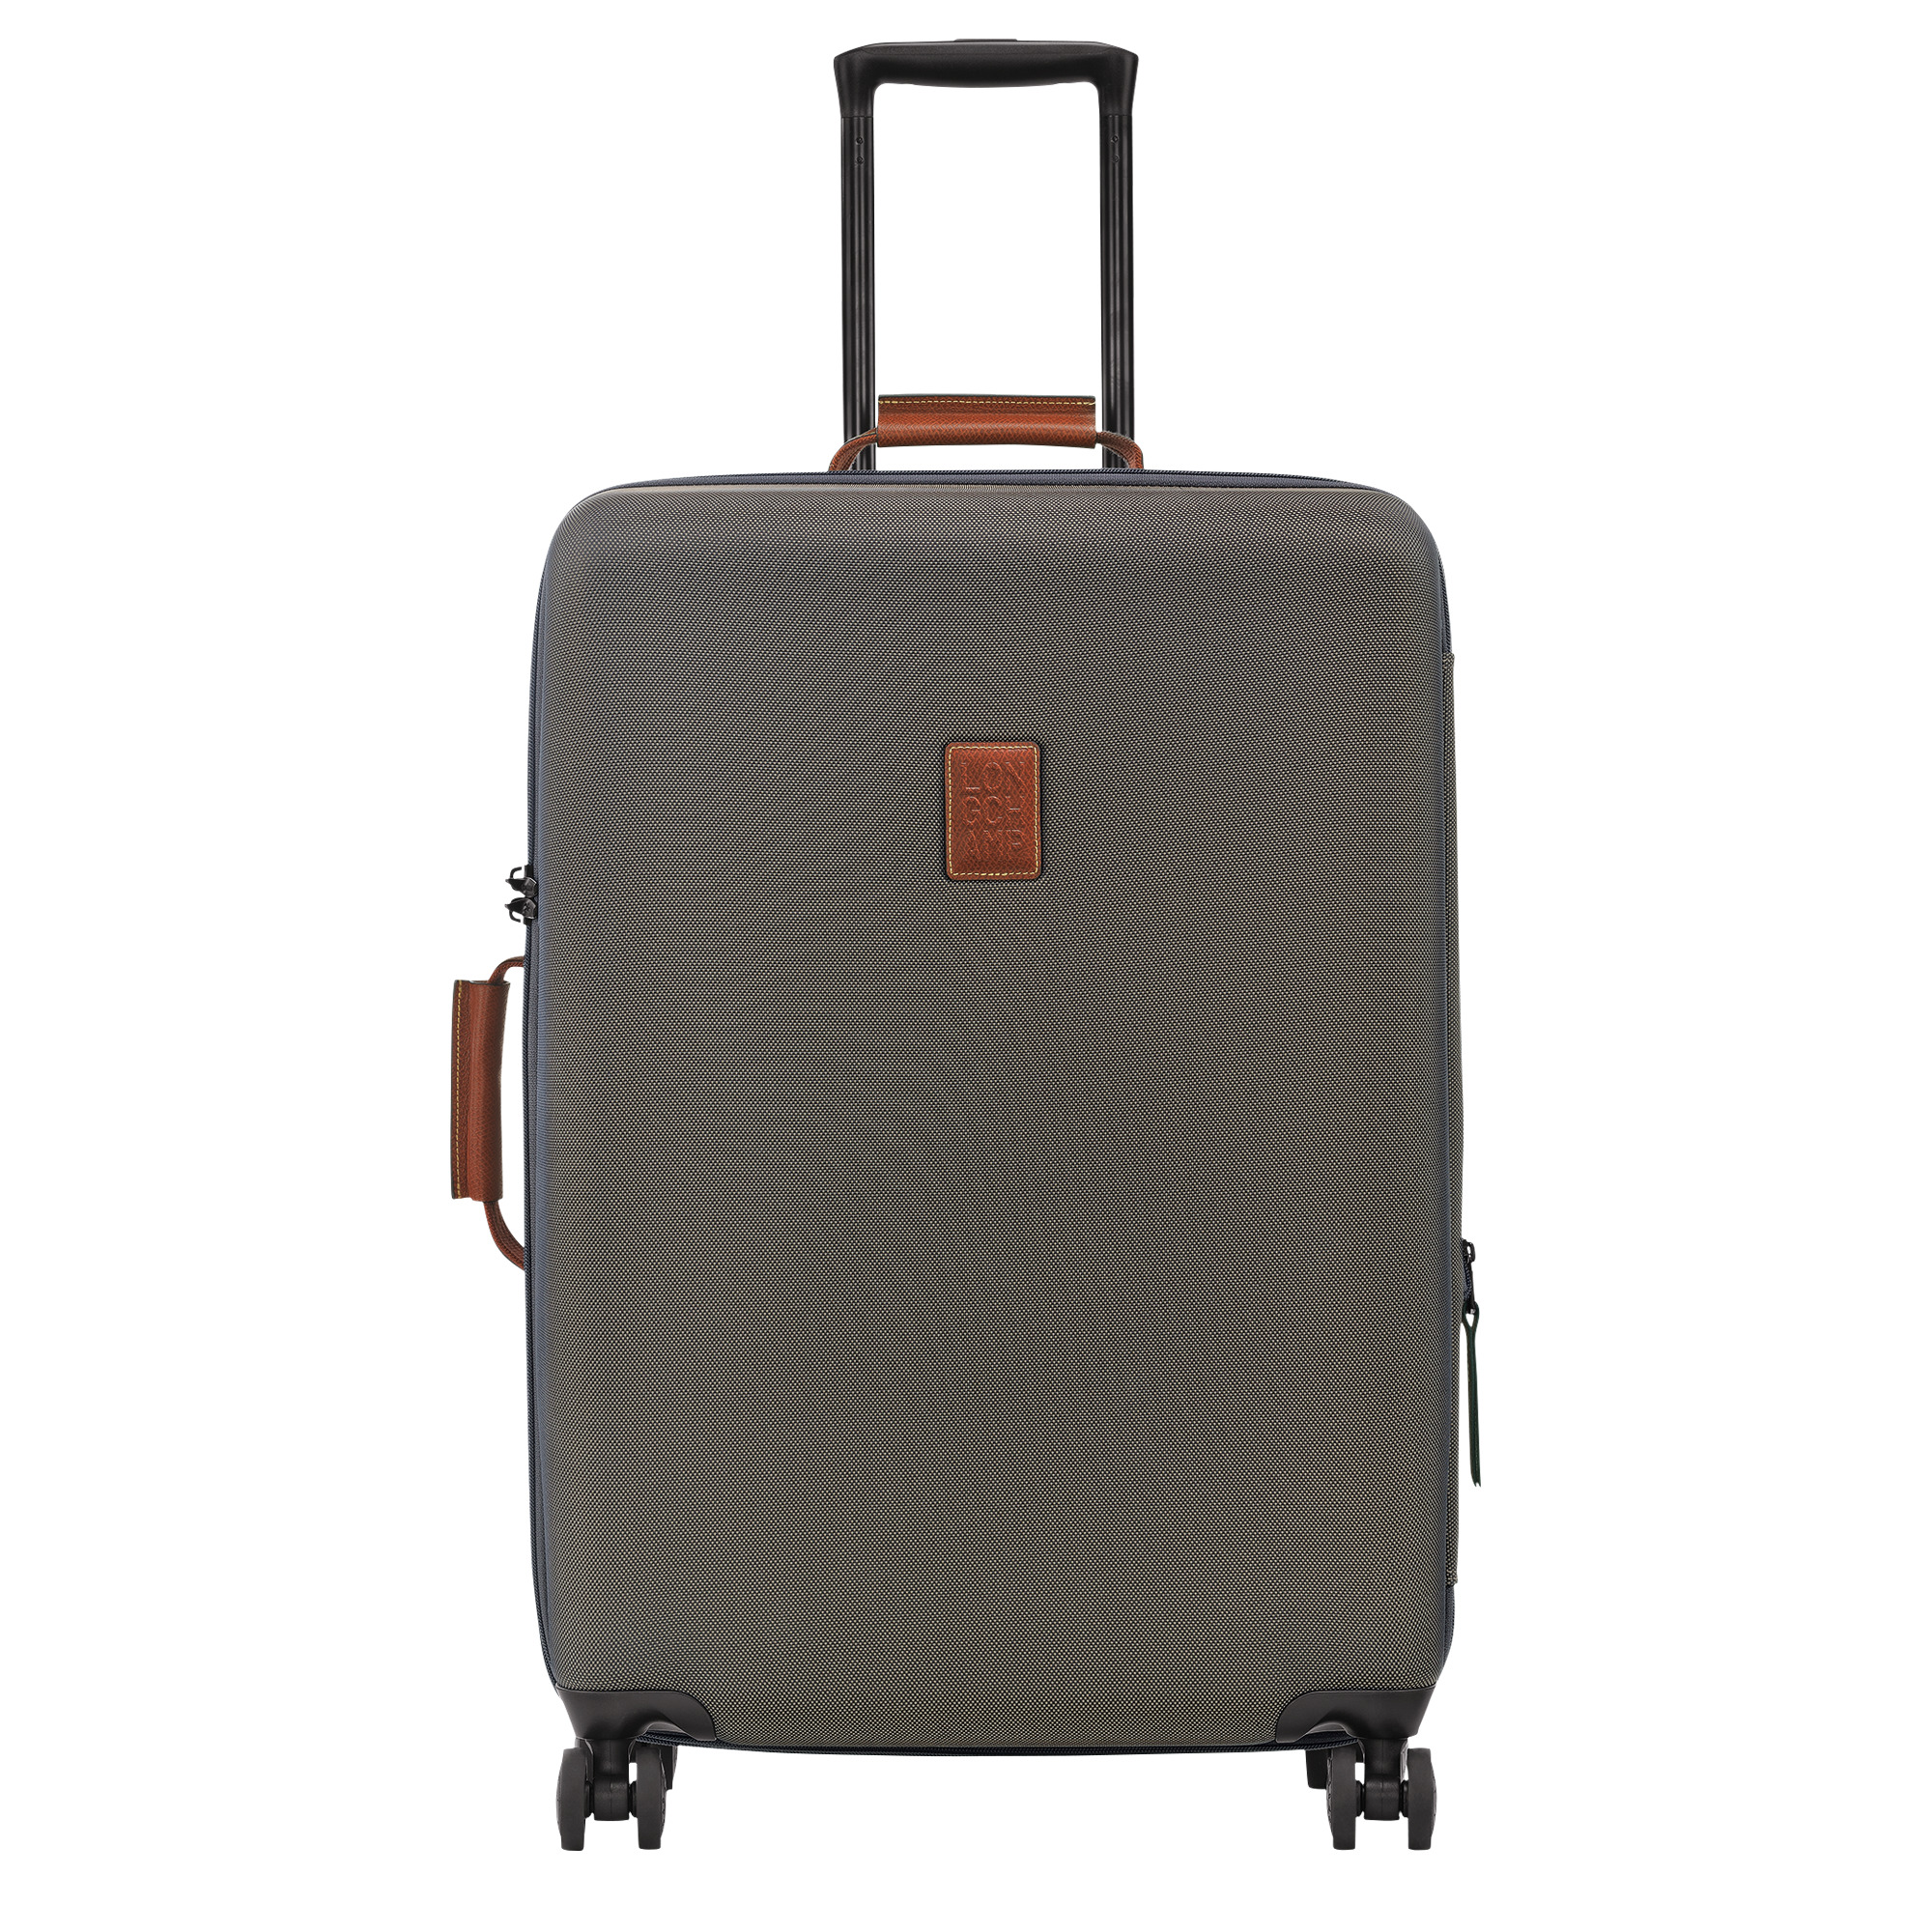 Boxford L Suitcase Brown - Recycled canvas - 1